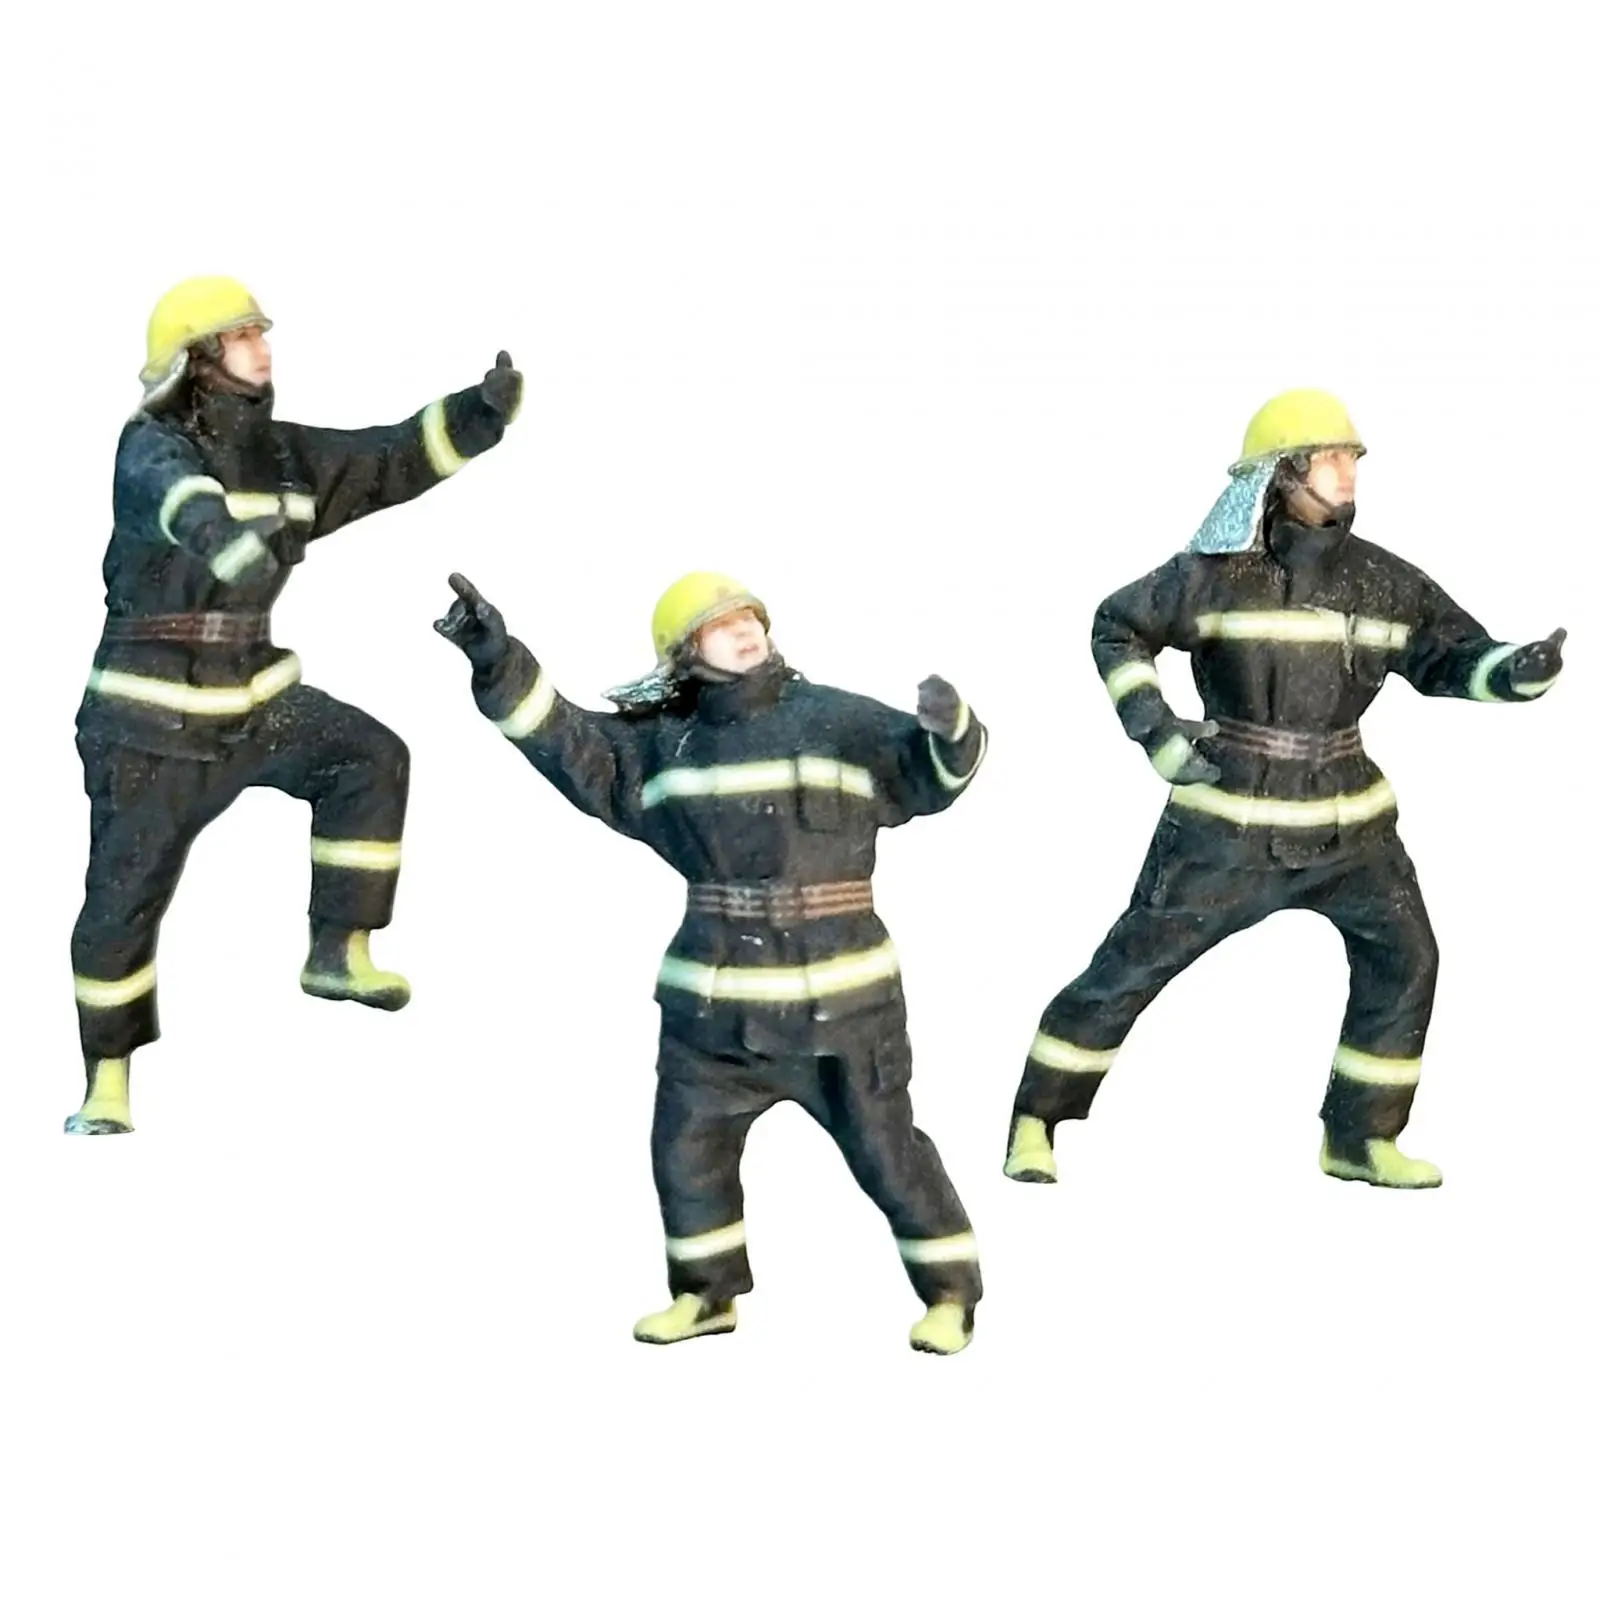 3 Pieces Miniature Firefighter Figures Sand Table Ornament for Photography Props Micro Landscapes Dollhouse Diorama Accessories